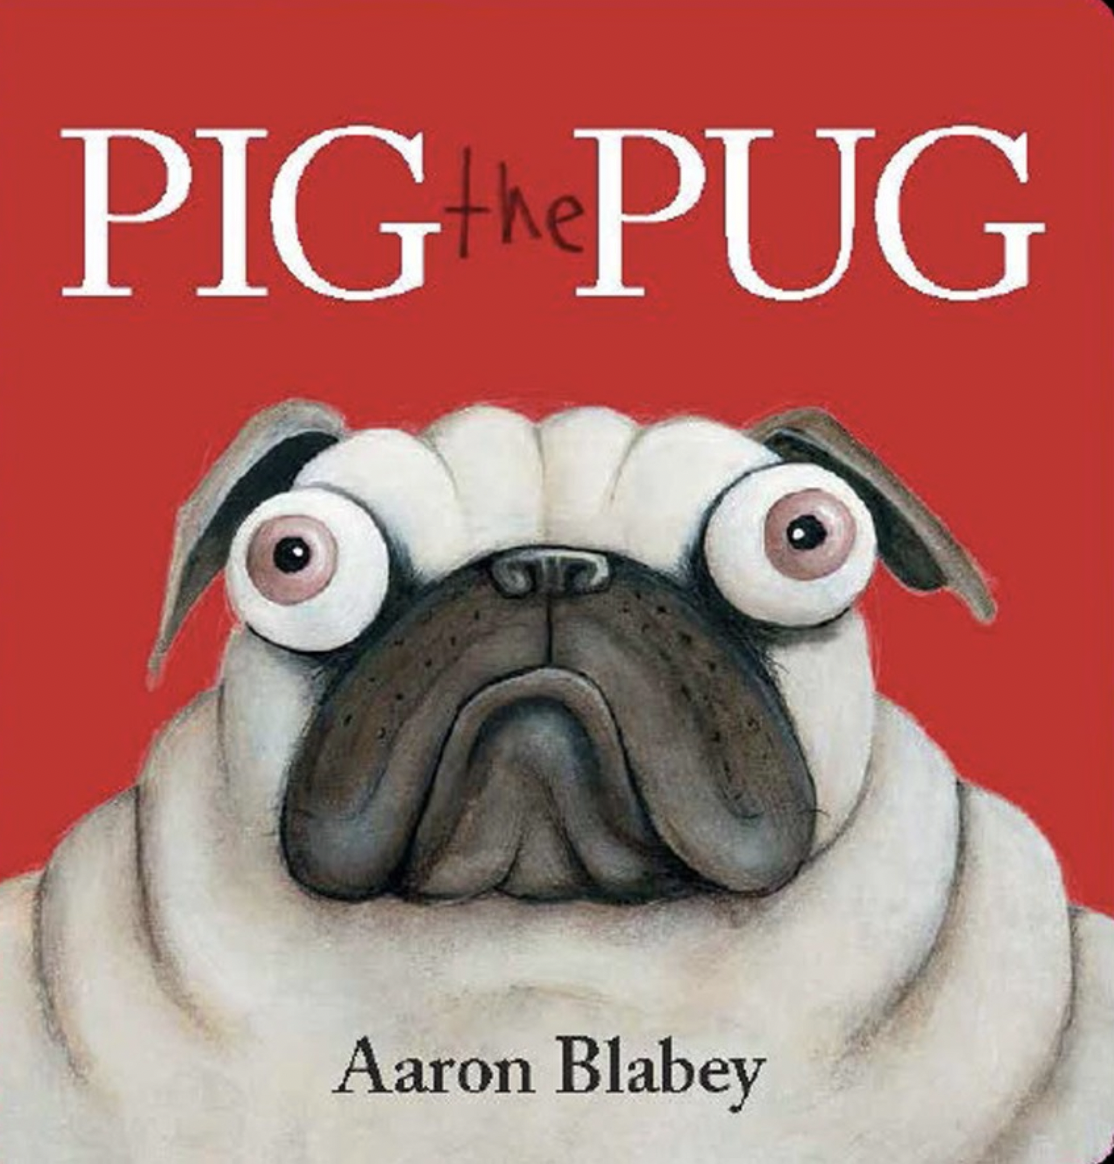 Pig the Pug Board Book by Aaron Blabey